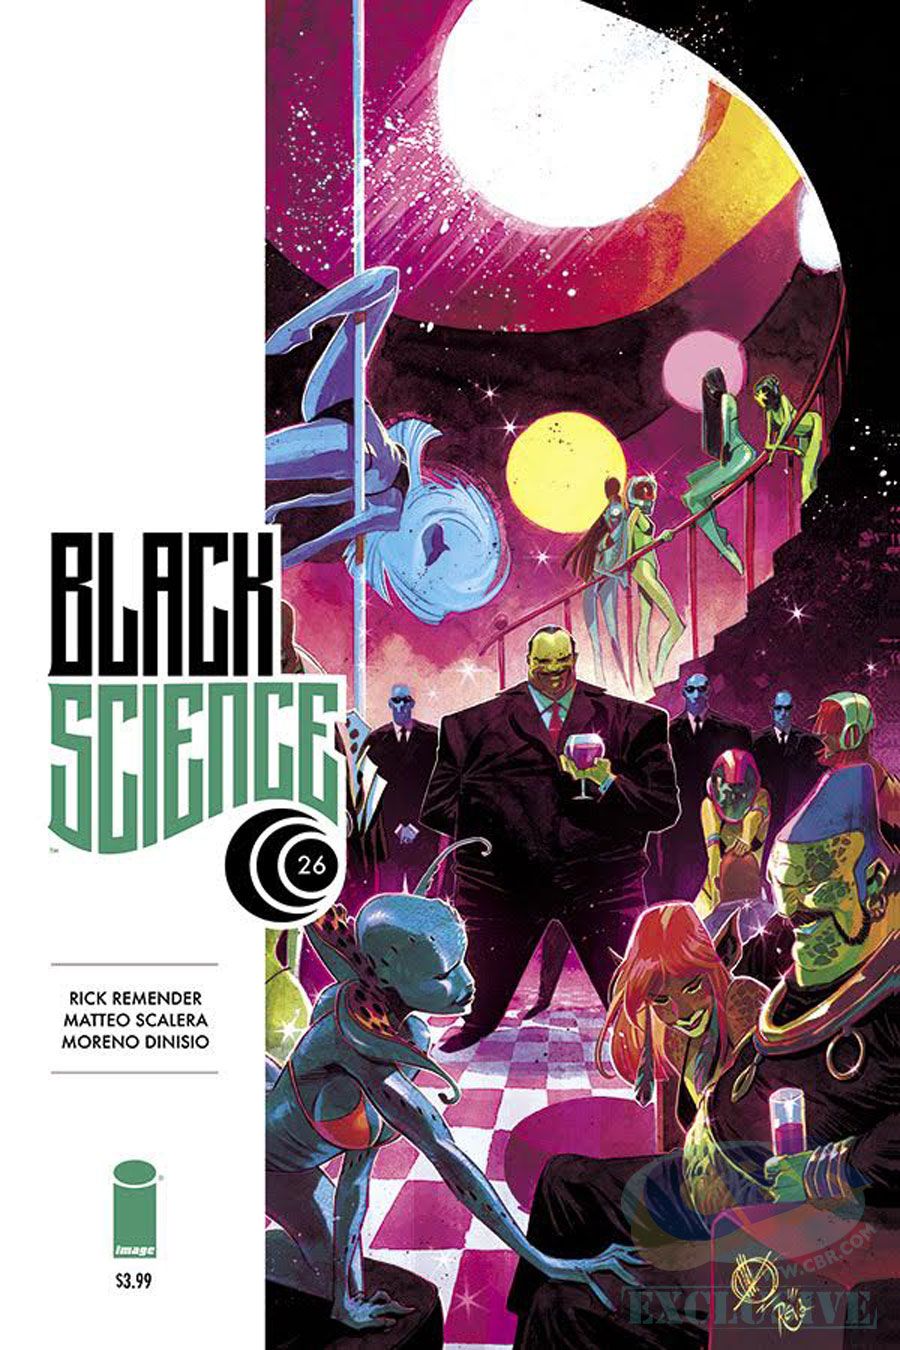 EXCLUSIVE: Matteo Scalera&#039;s cover for Black Science #26